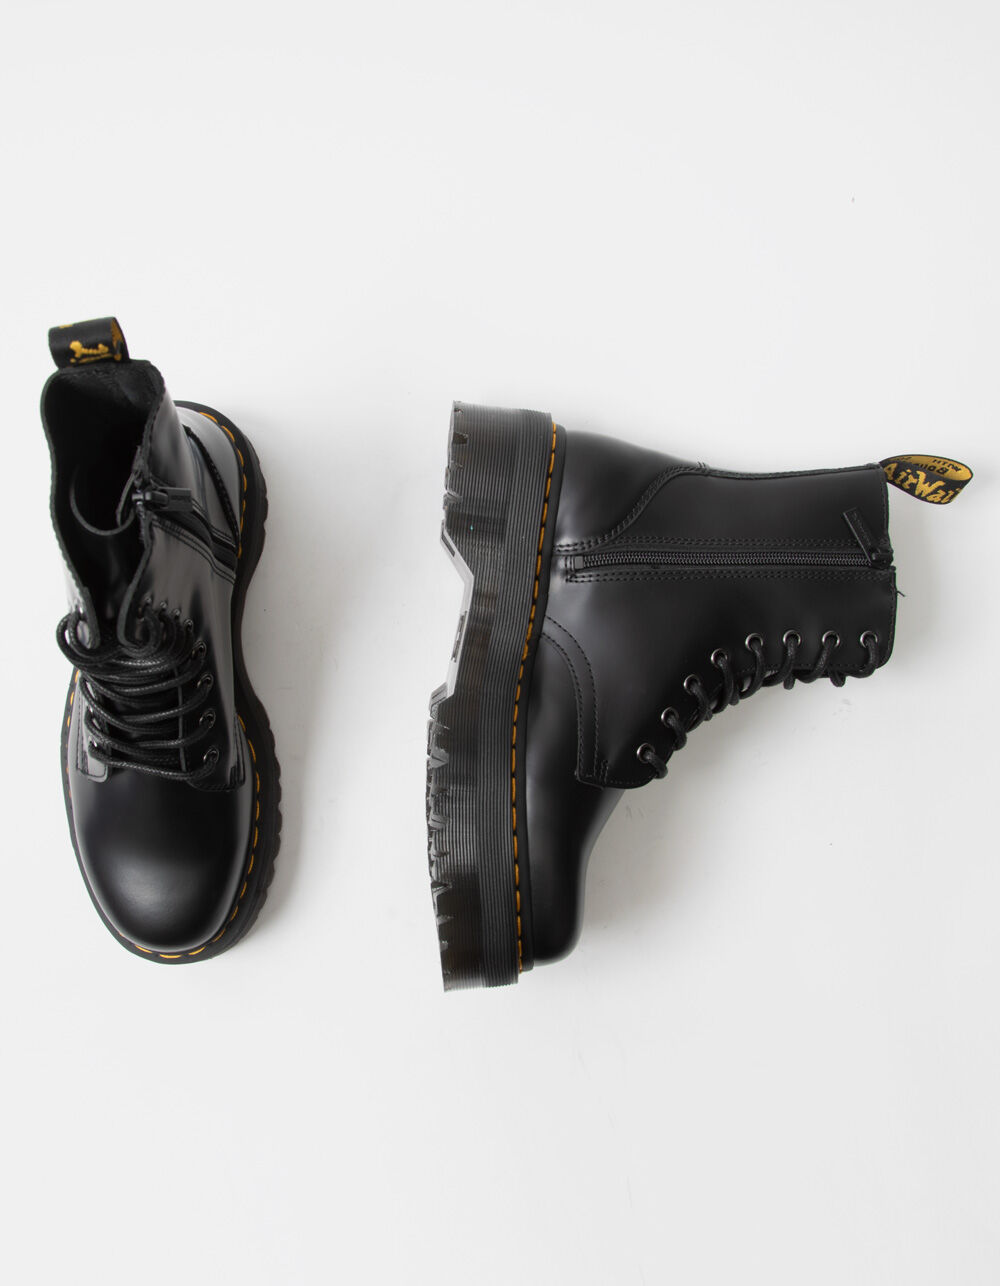  Dr. Martens Bag, Black : Clothing, Shoes & Jewelry